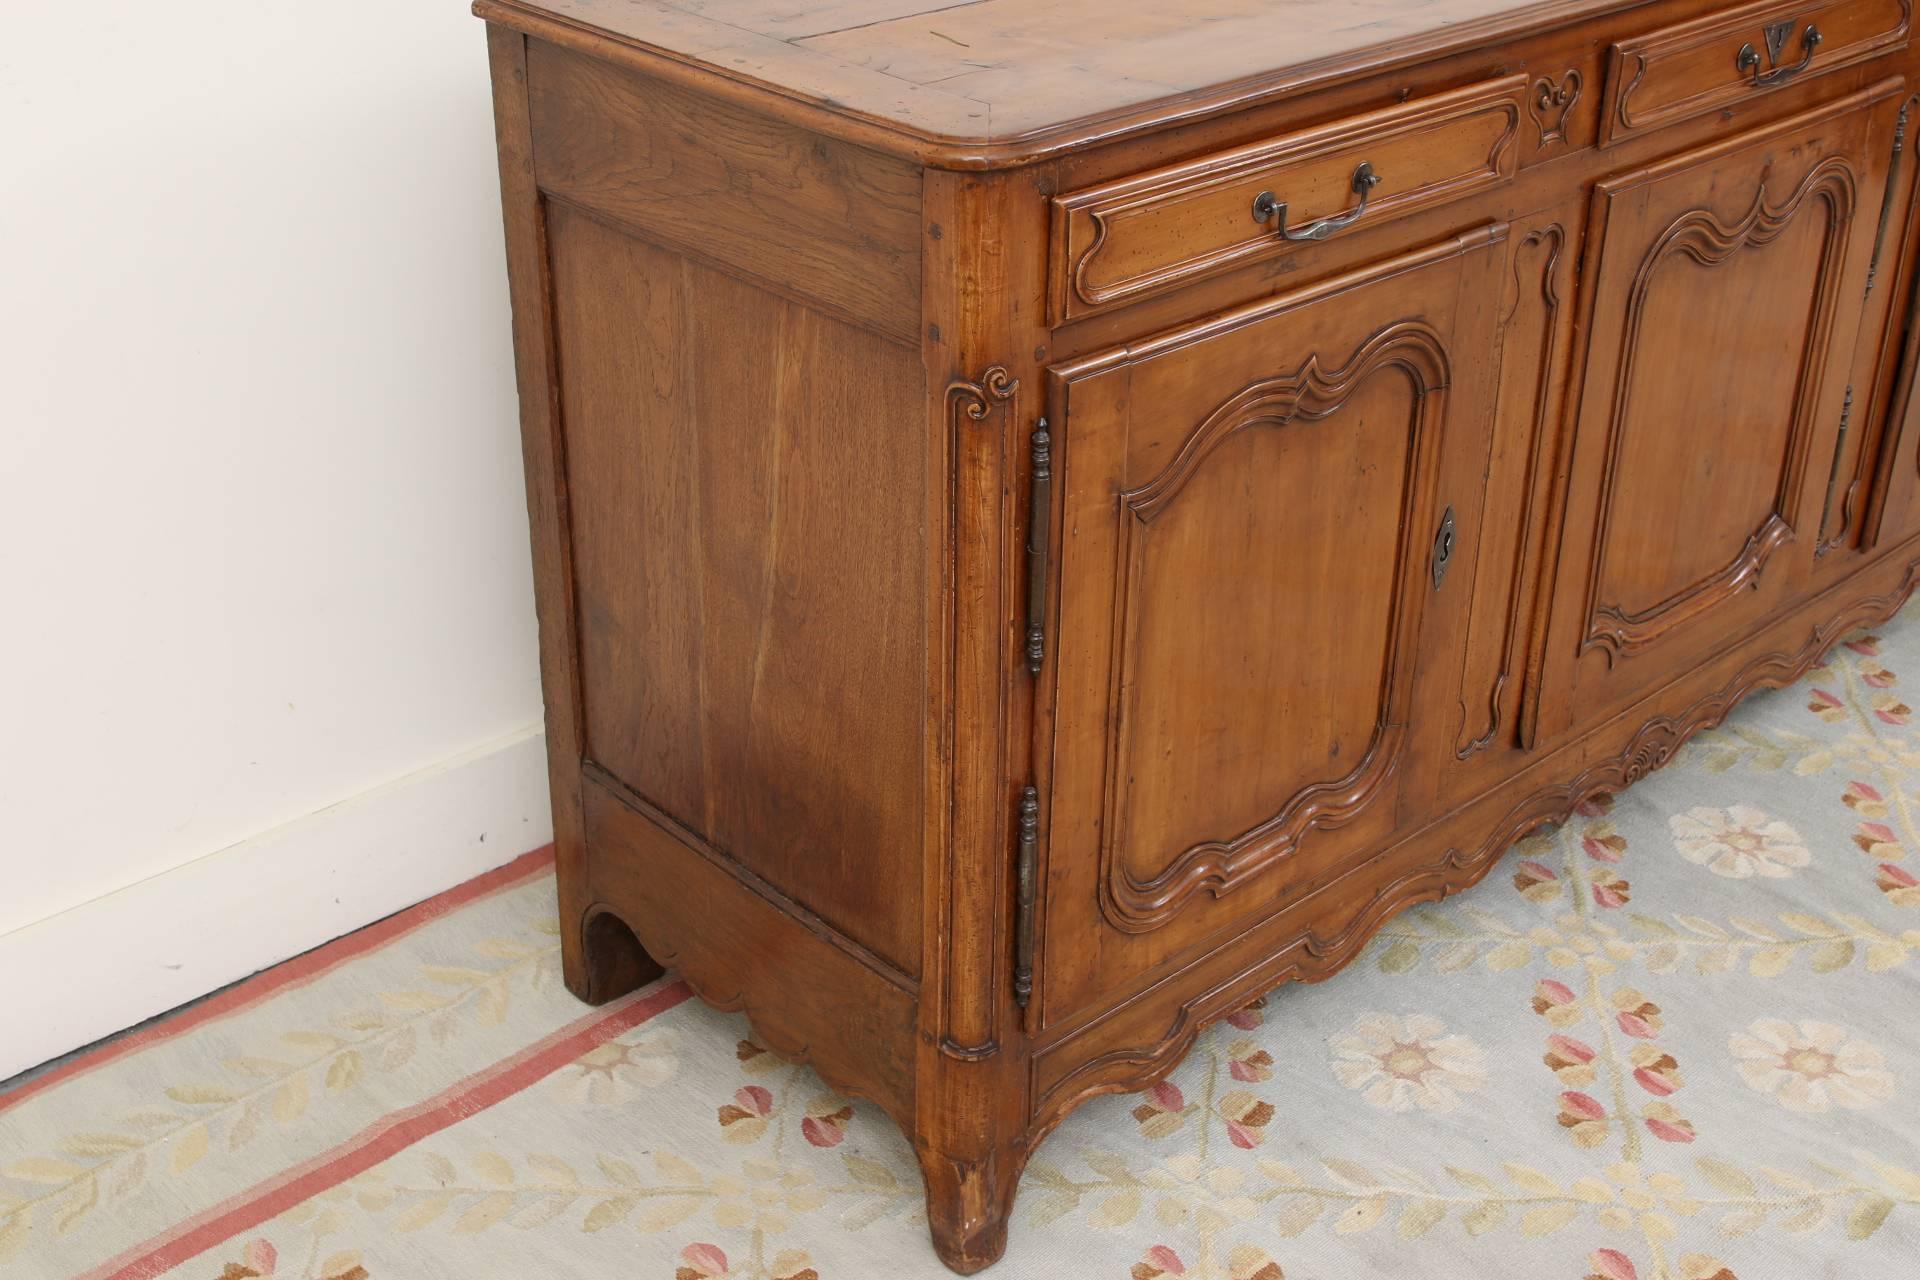 A tall sideboard (Enfilade) in walnut with carved and recessed panels on the front, and oak recessed side panels. The plank top with banded sides and bullnose edge, over three apron drawers with metal handle pulls (the enter one with escutcheon,